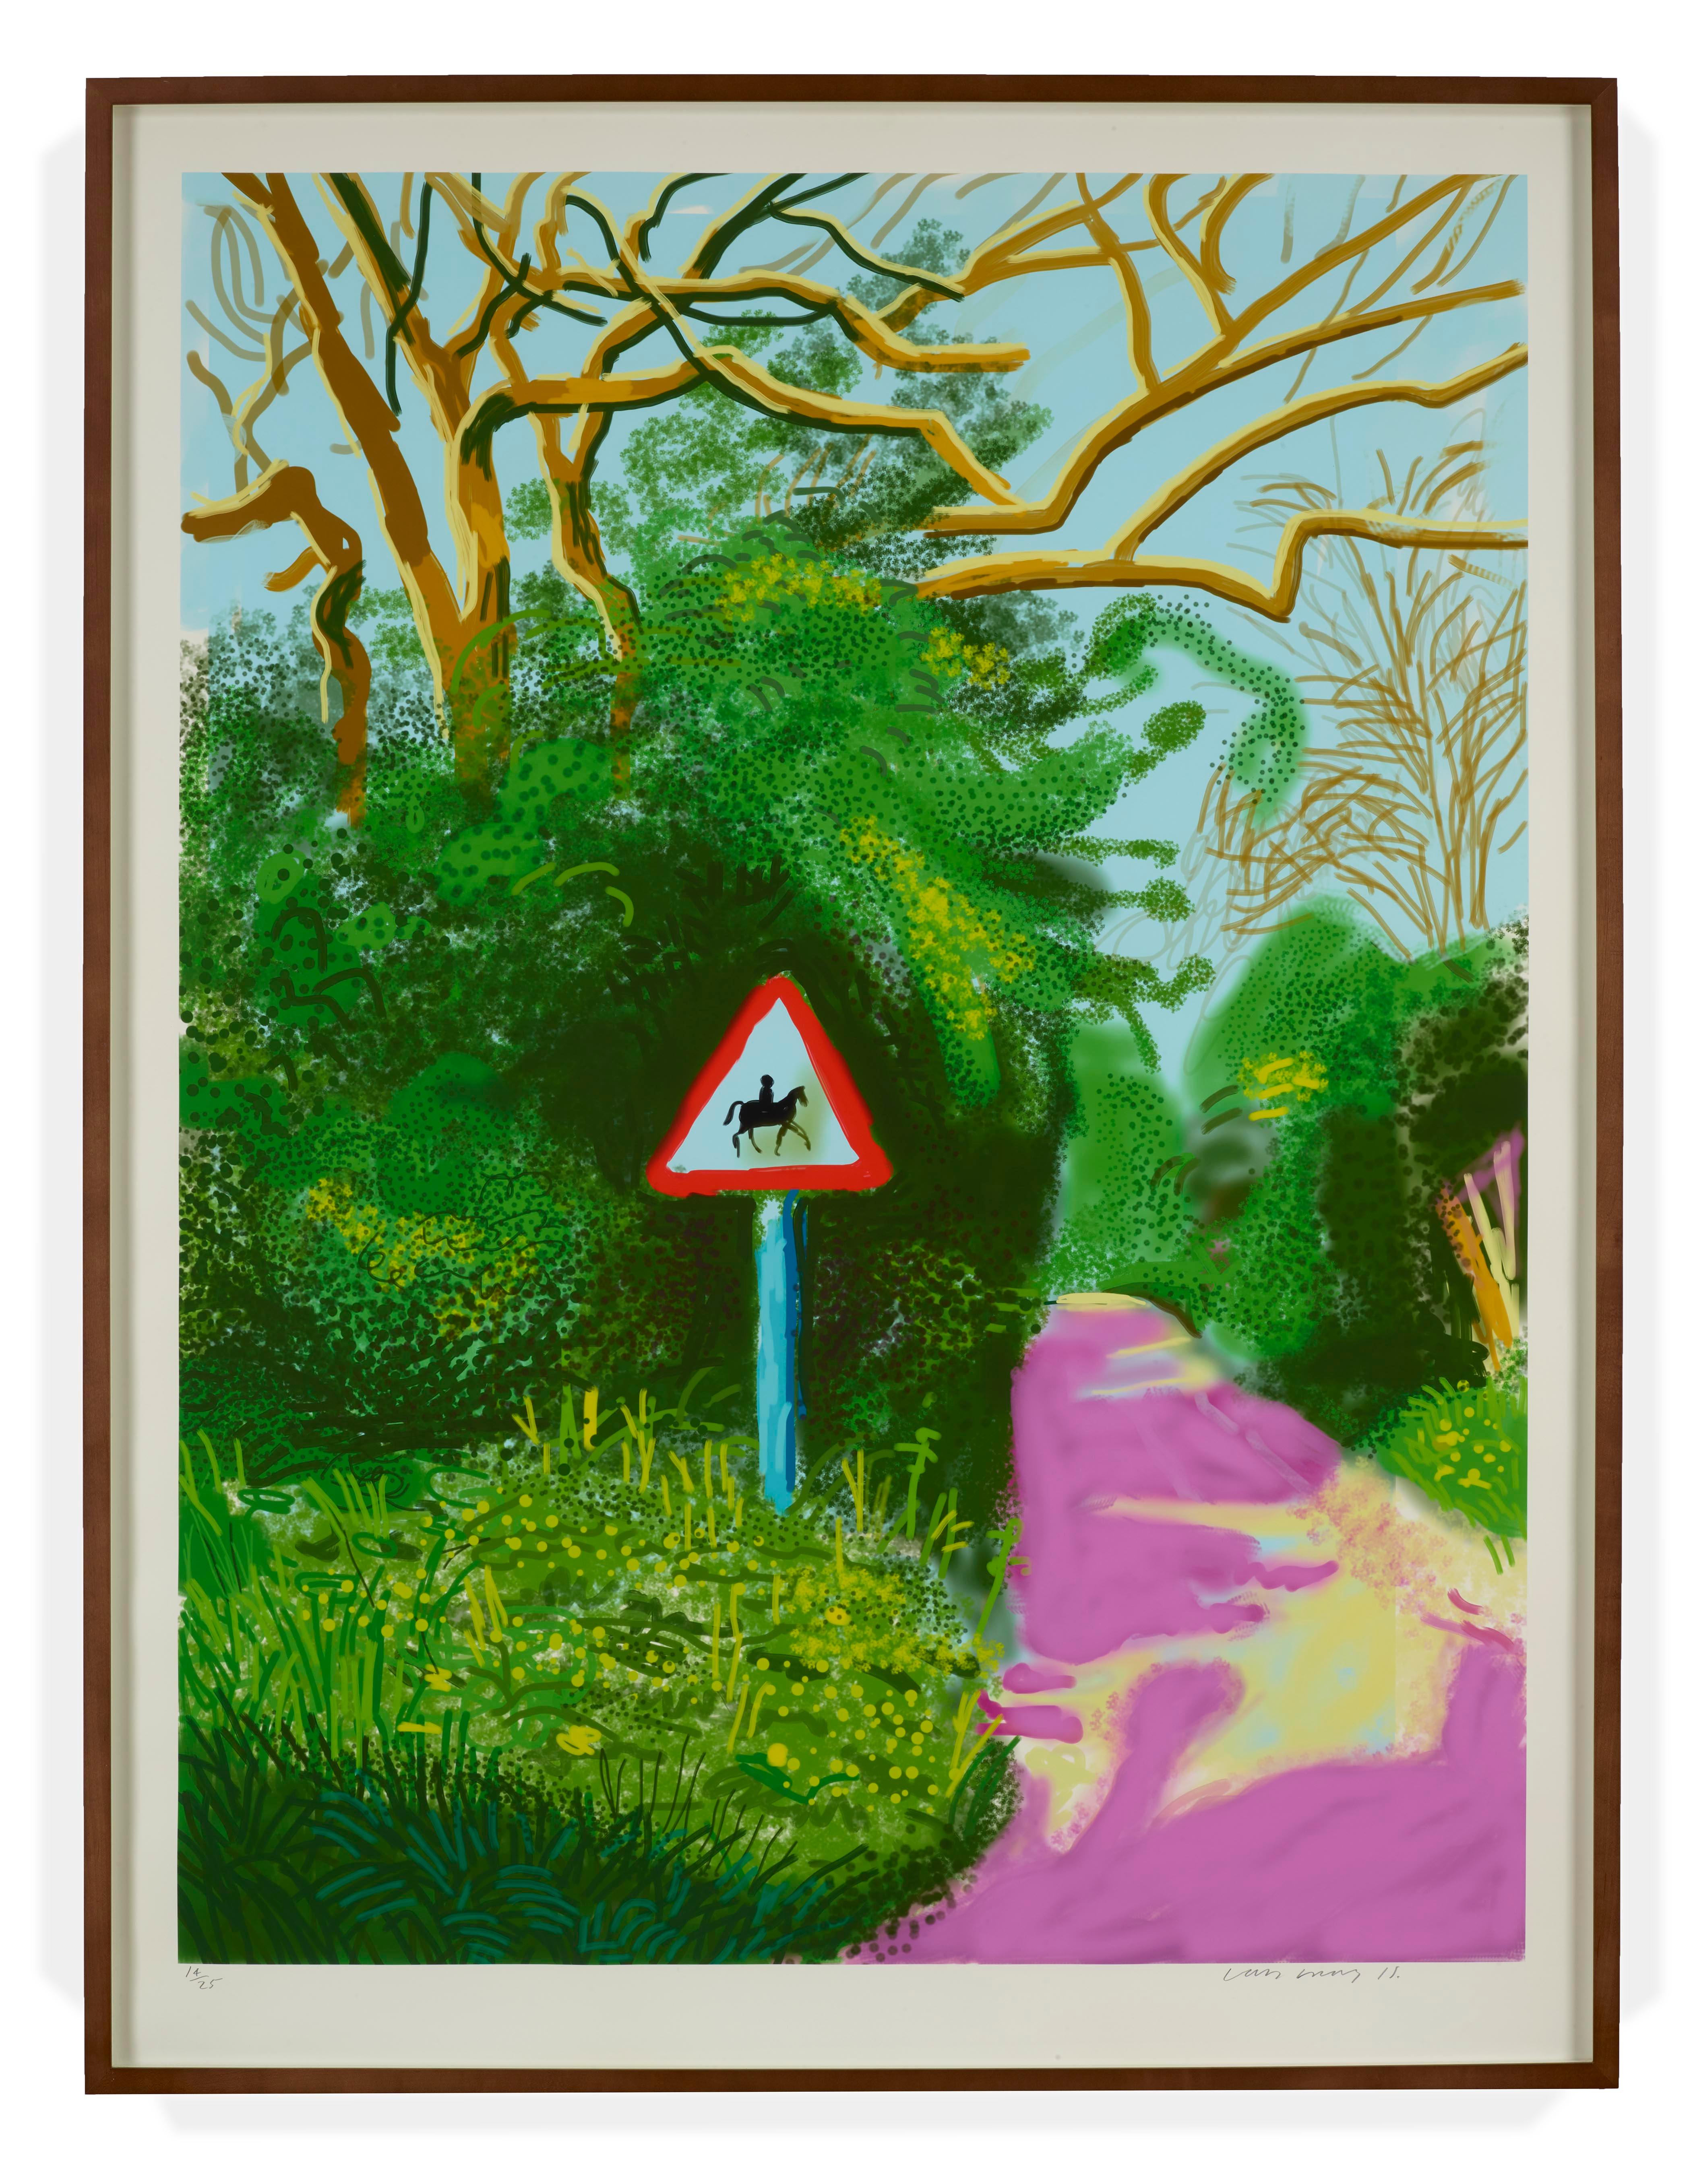 David Hockney Landscape Print - The Arrival of Spring in Woldgate, East Yorkshire in 2011 – 5 May 2011